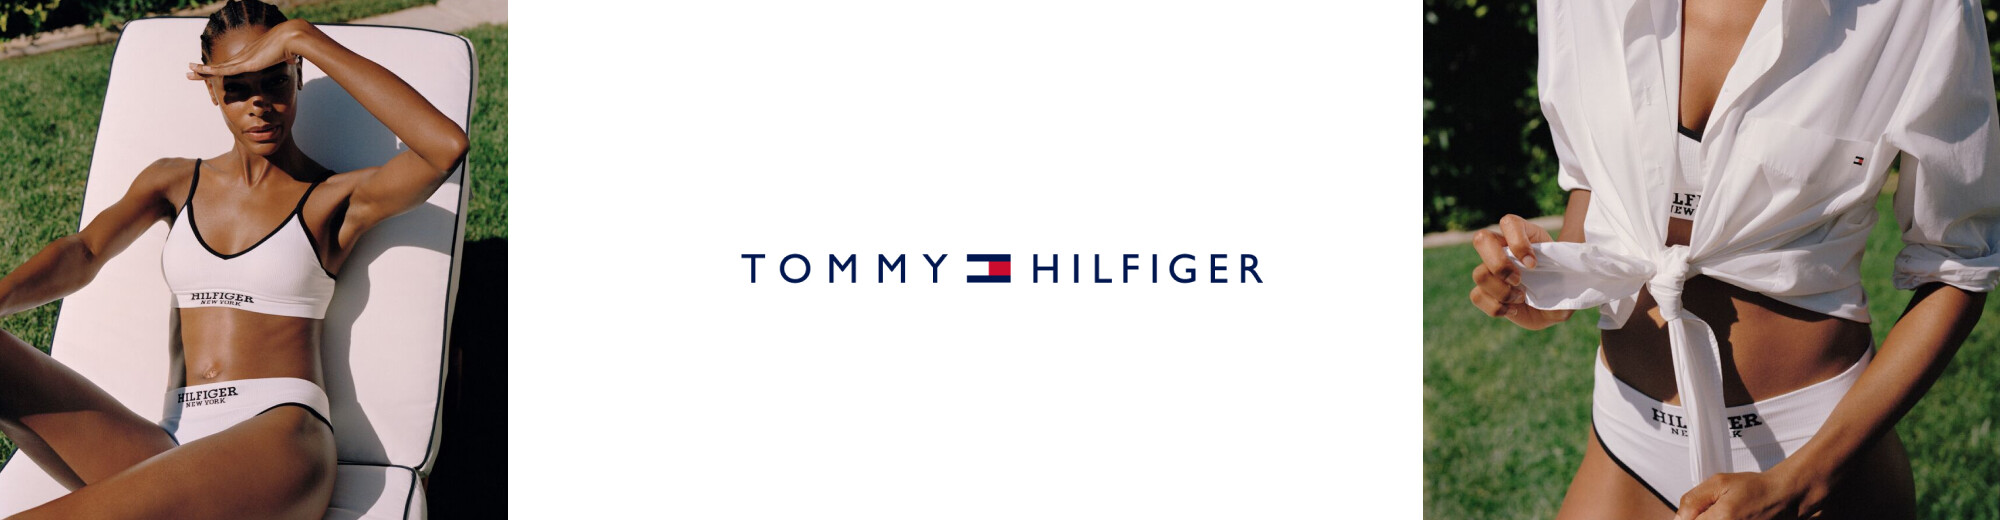 Ropa Interior Tommy Hilfiger Mujer Descuento